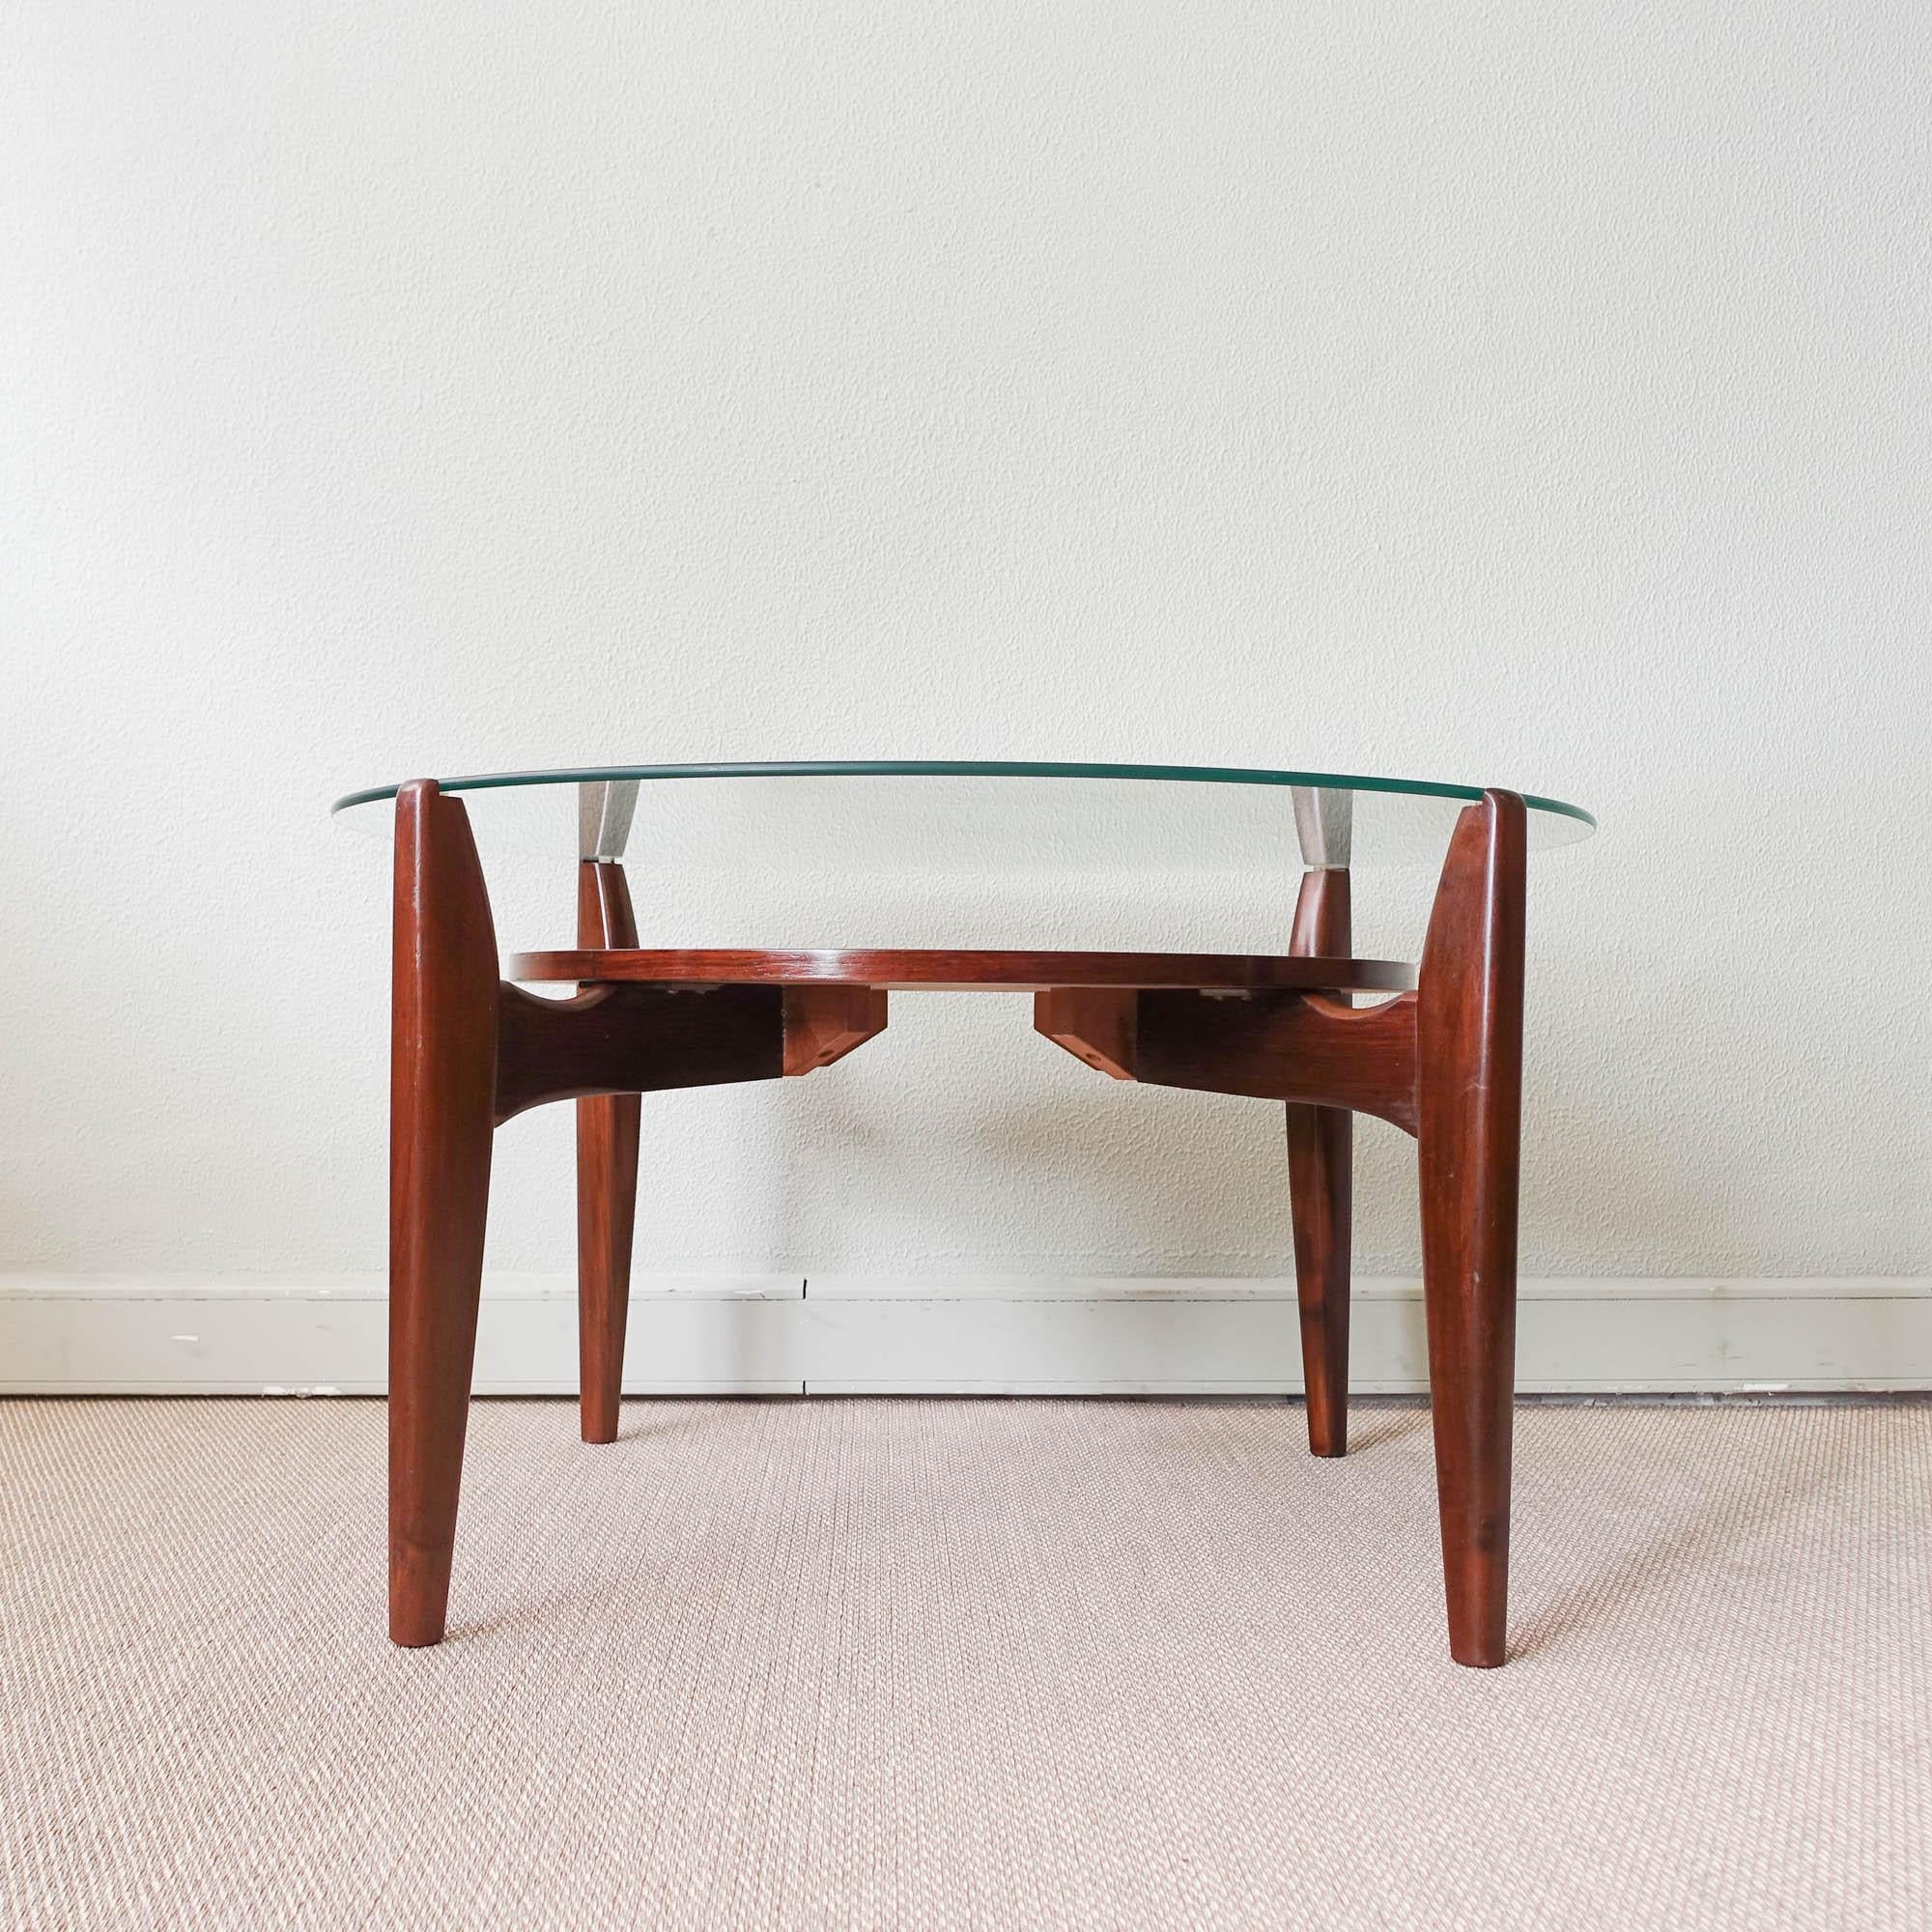 This coffee table was designed and produced by Wilhelm Renz, in Germany, during the 1960's. It has an organic inspired solid walnut framework and a circular glass top. An unique design. In original and good vintage condition.